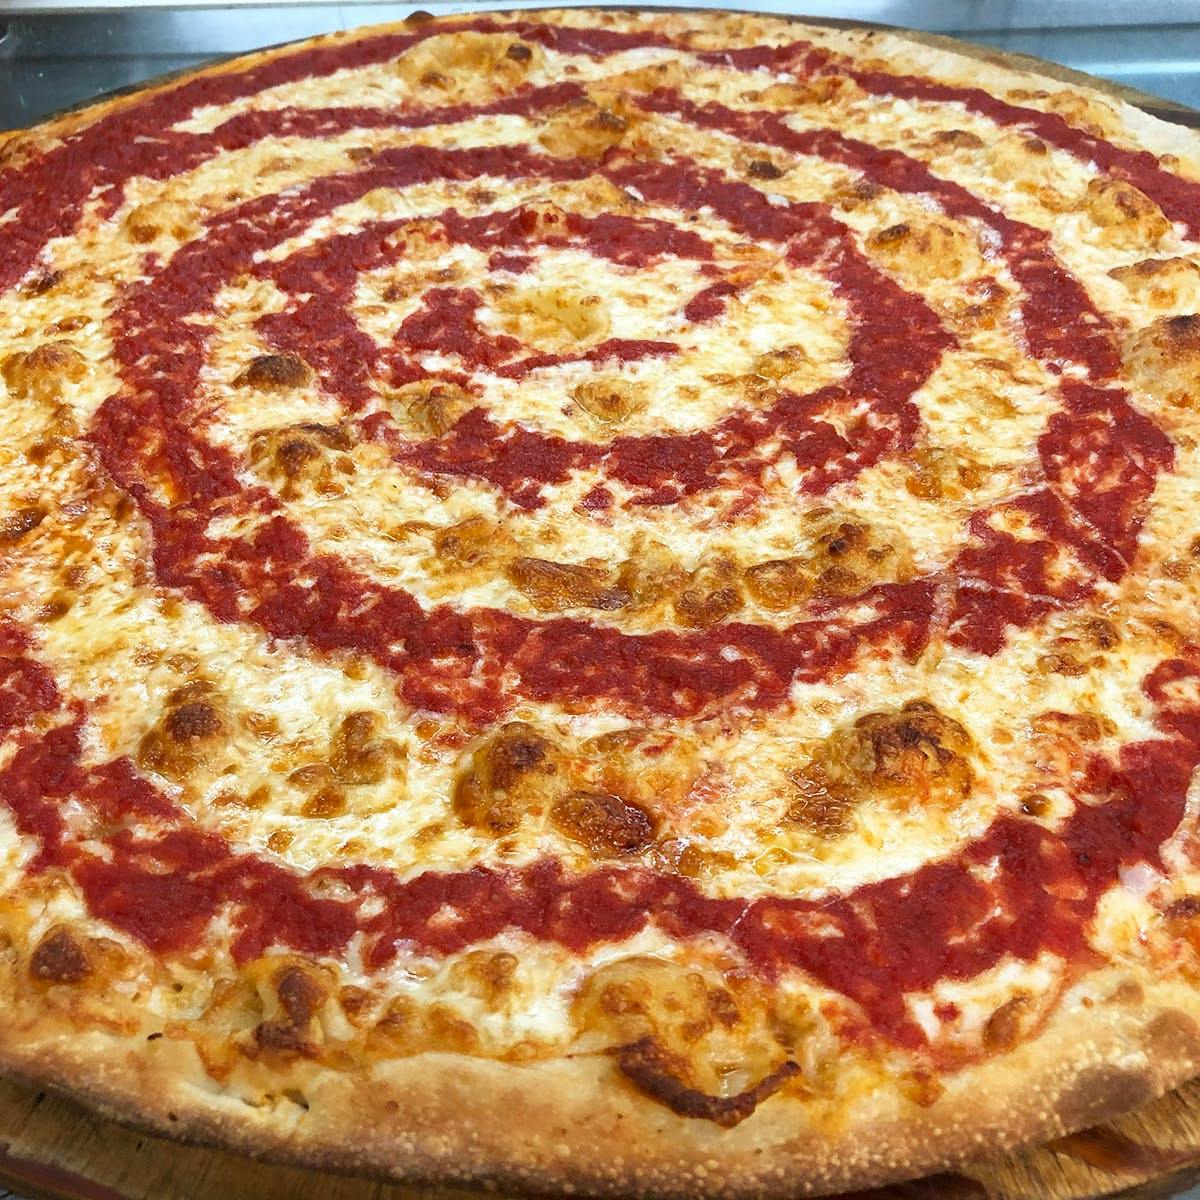 Maruca's crowned pizza king at second New Jersey Pizza Bowl